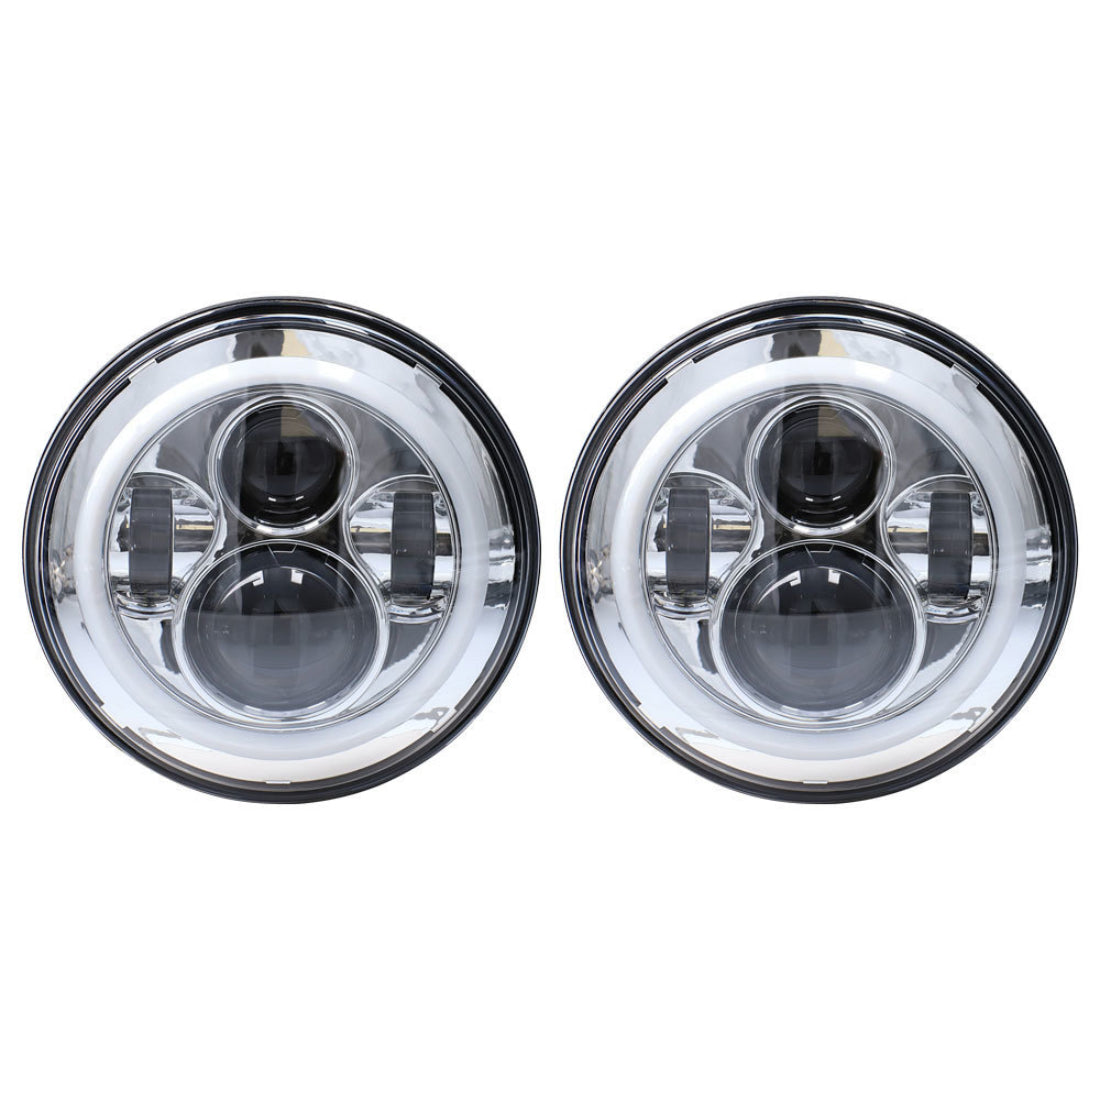 METRA JP-702S Headlights with Silver Face and Full Halo - 7 Inch, 9 LED